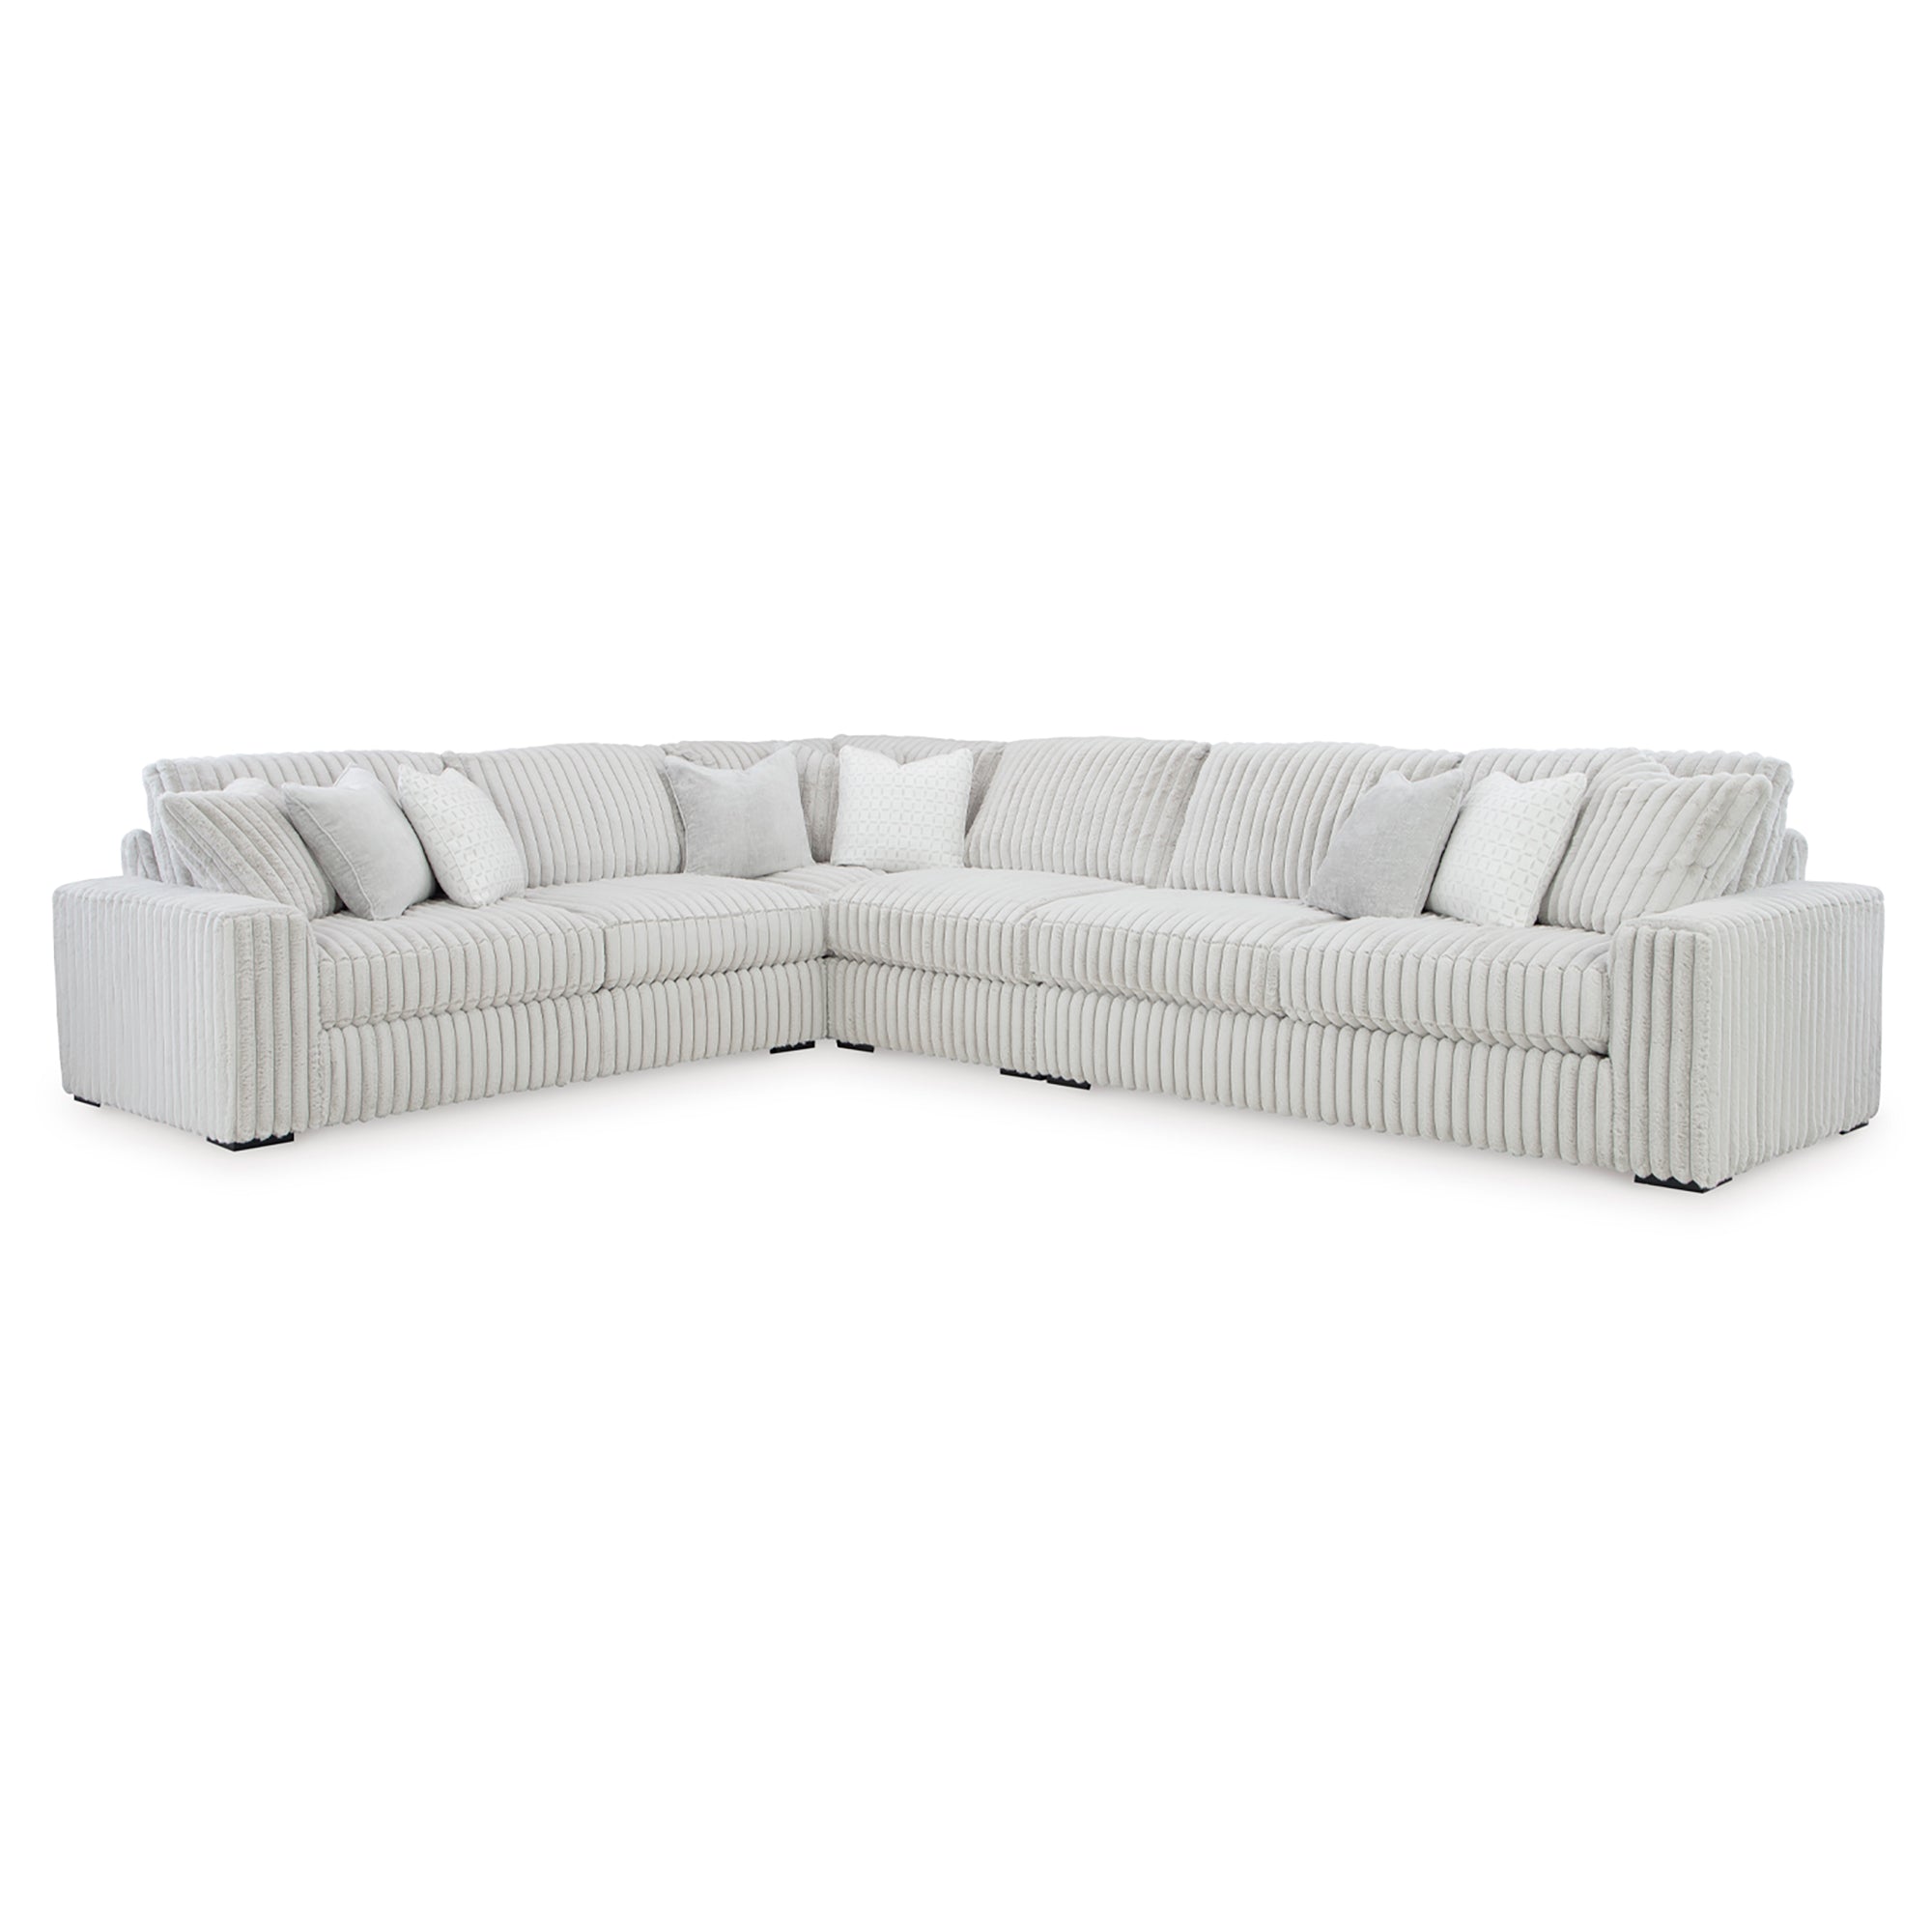 Stupendous 4-Piece Sectional with retro-cool jumbo cord and feather-blend cushions for unparalleled comfort and style